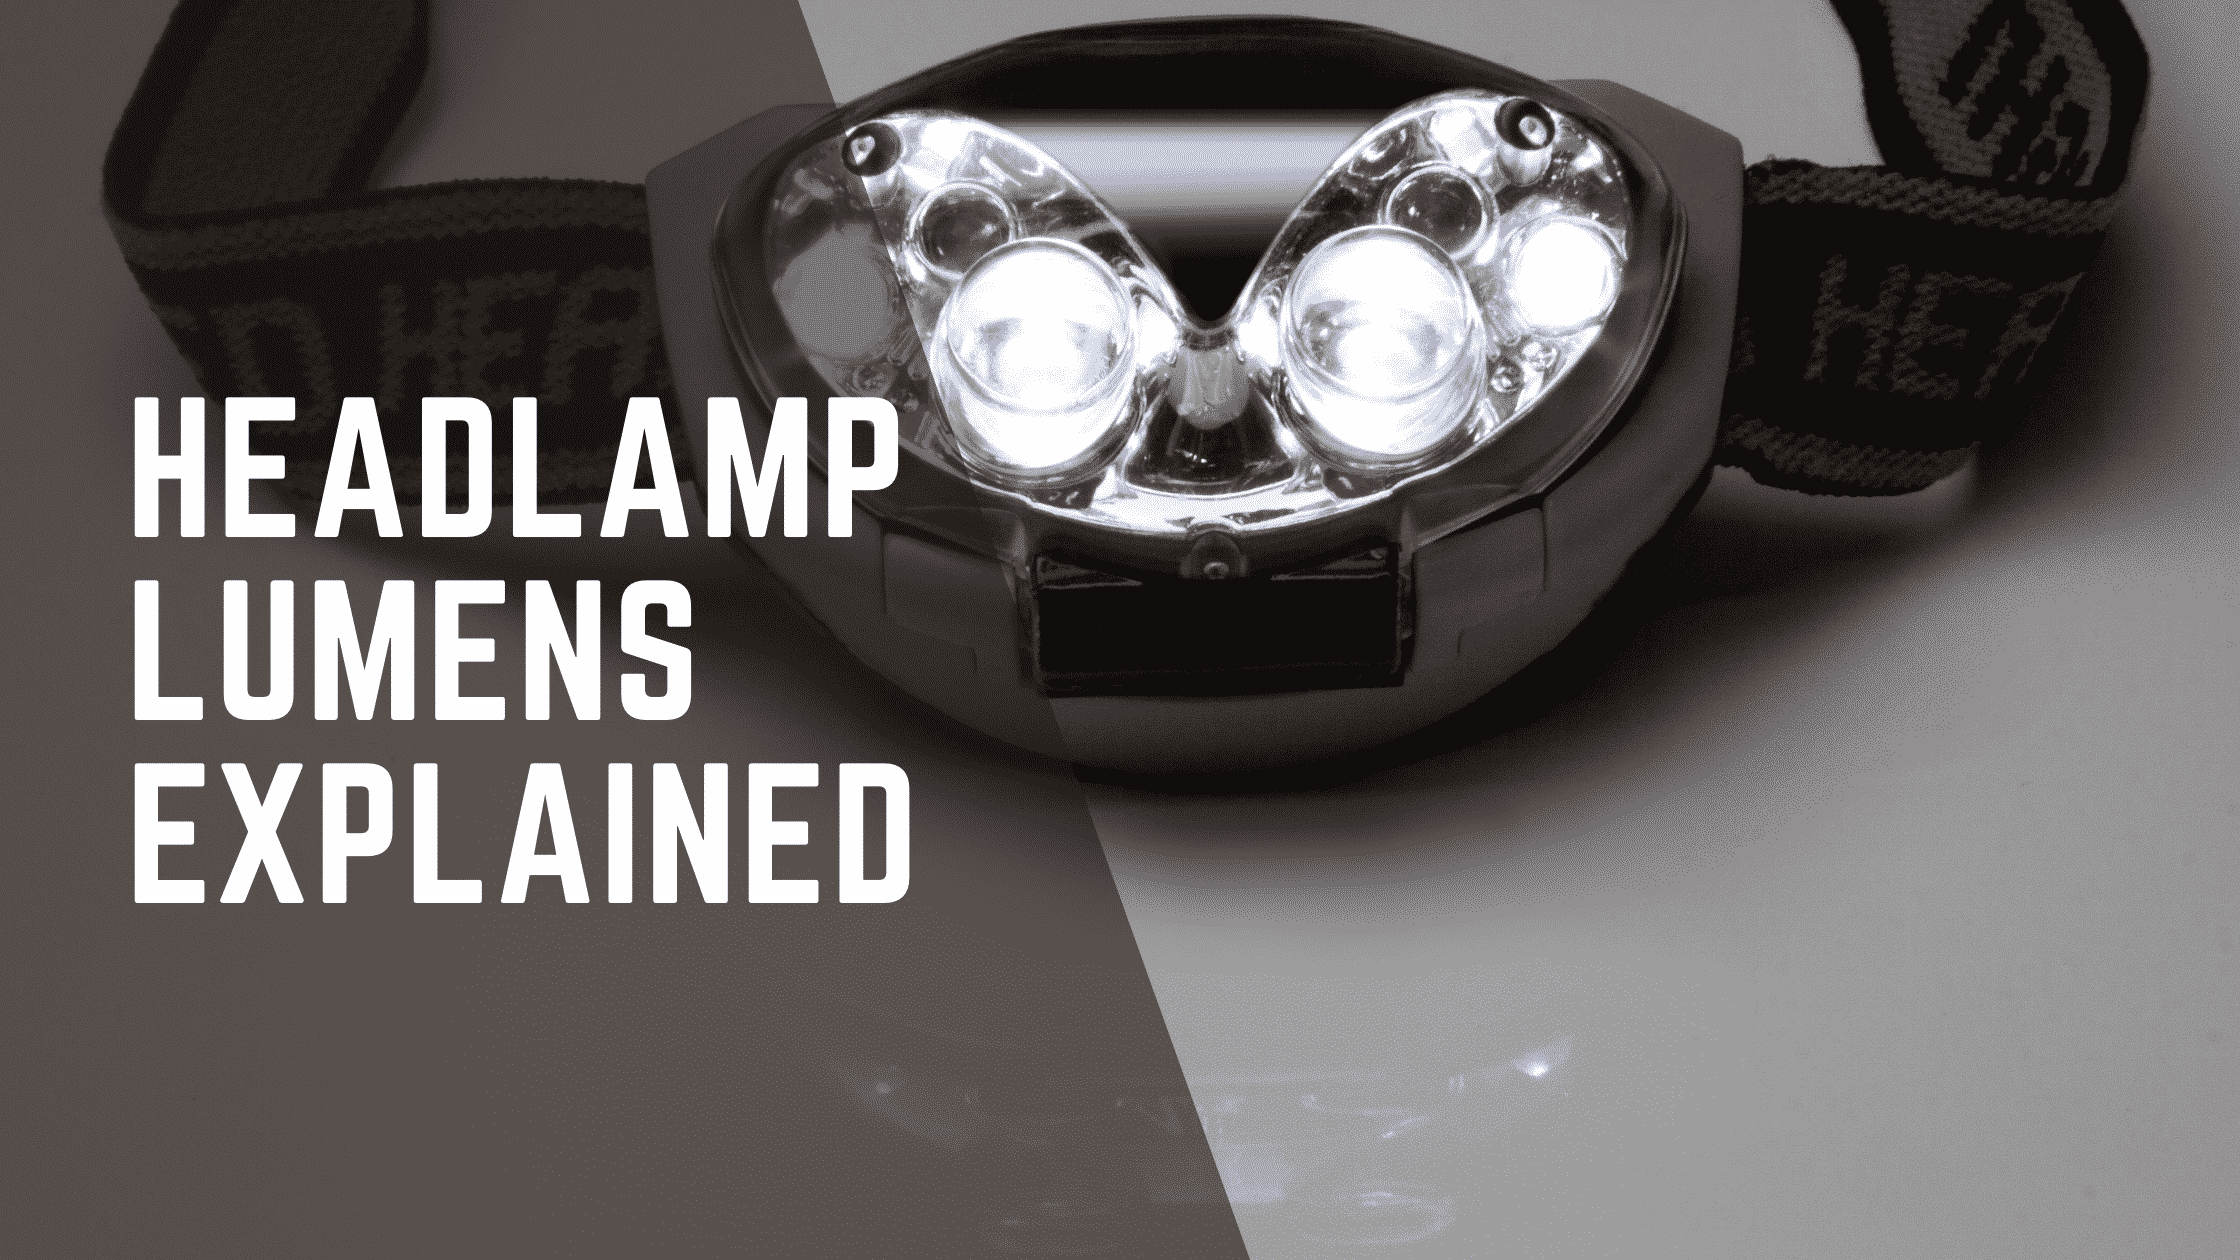 How Many Lumens Should A Headlamp Have?